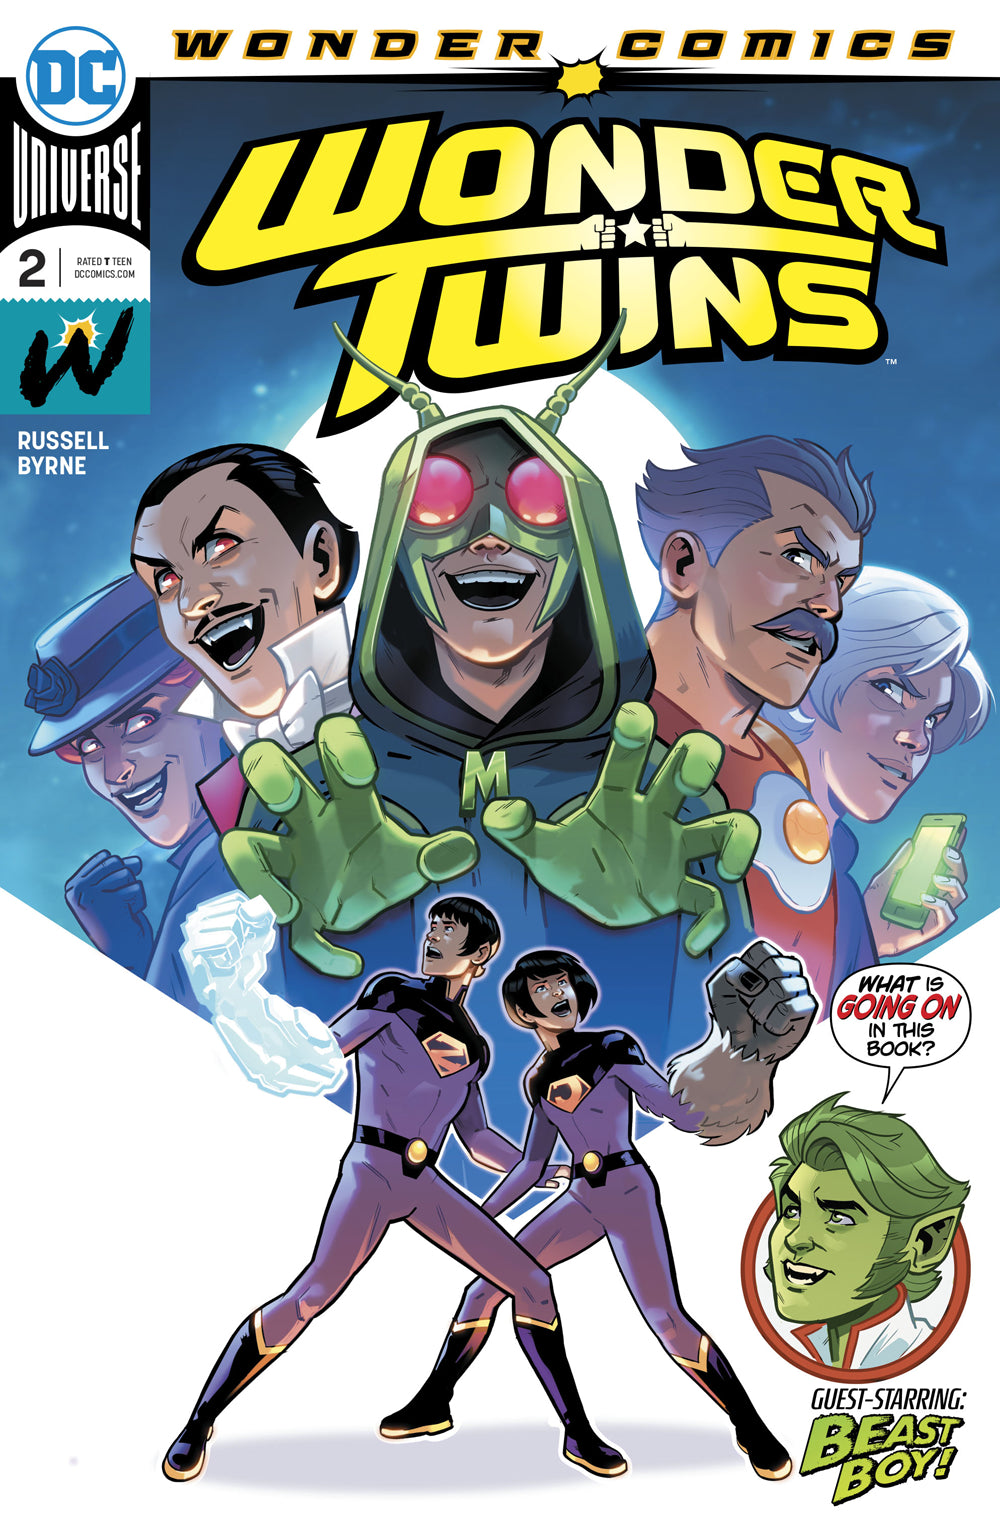 WONDER TWINS #2 (OF 6) COVER